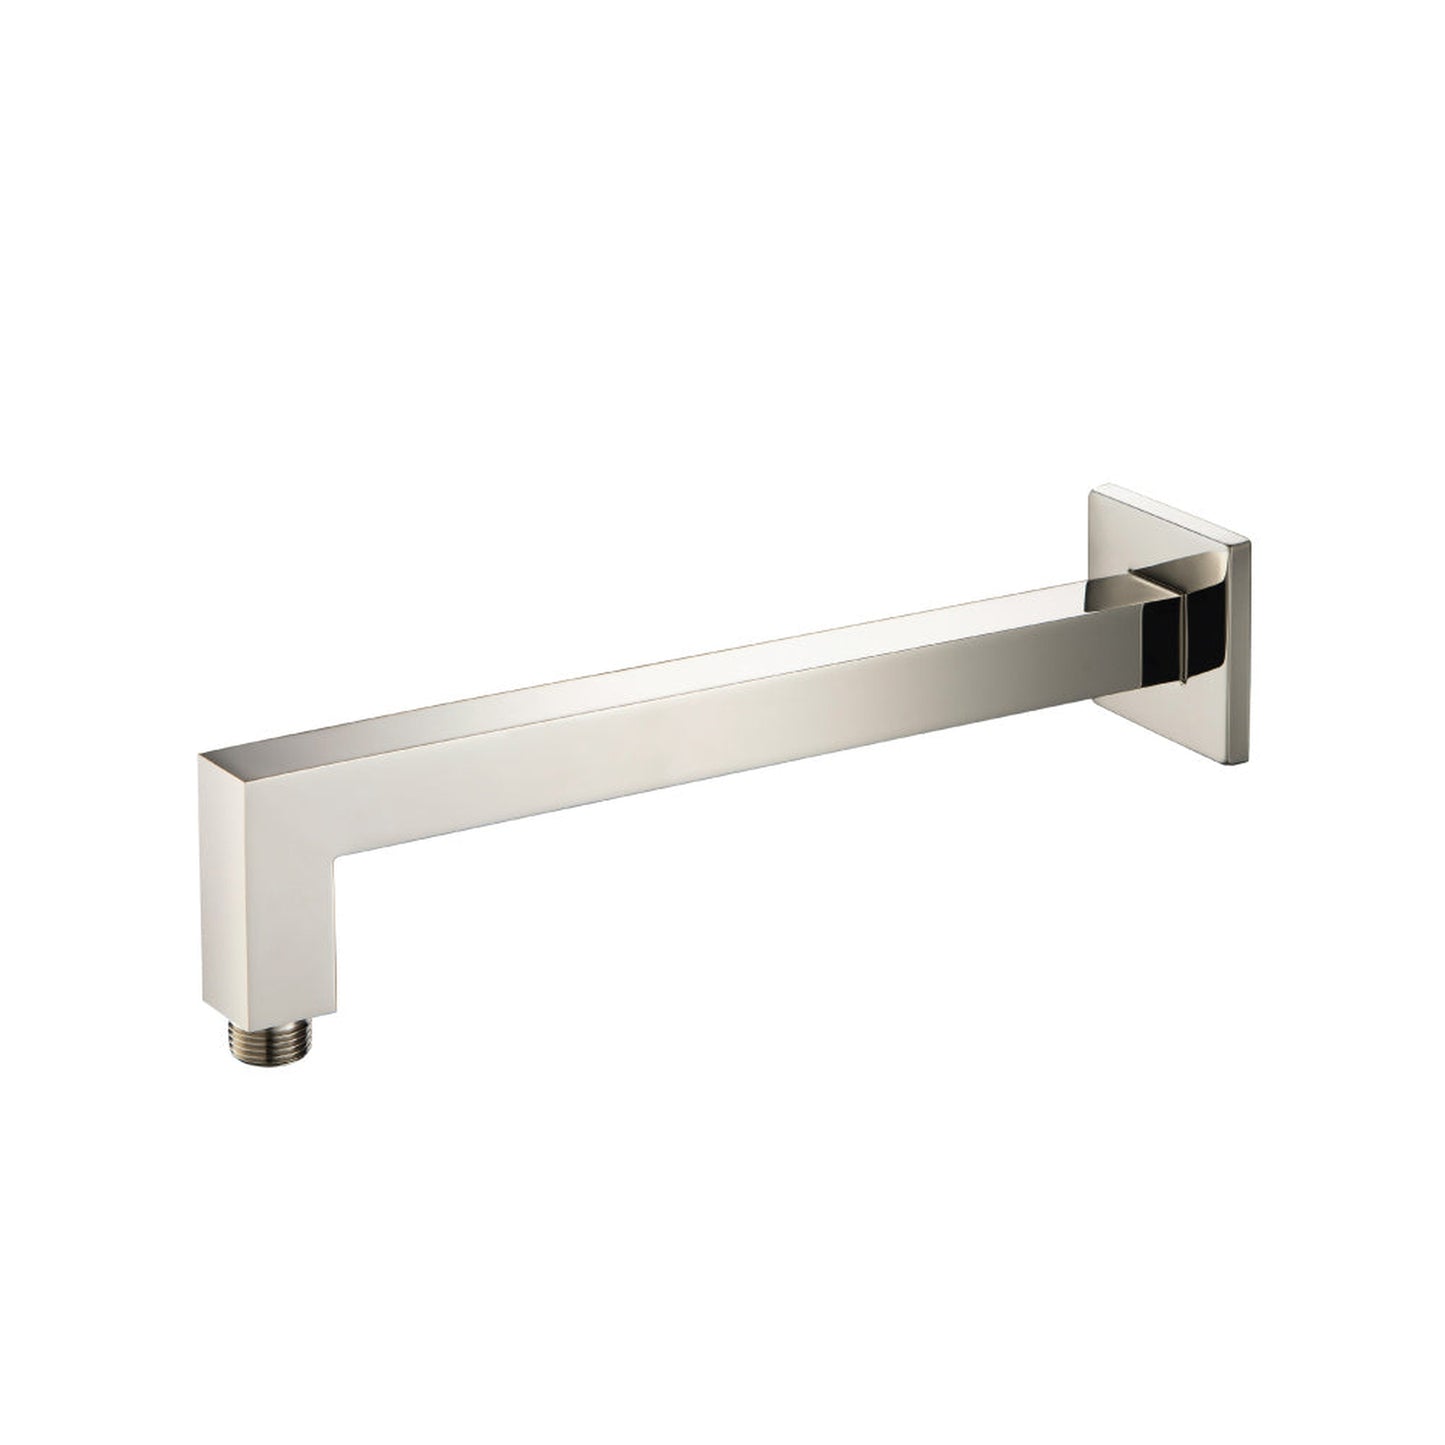 Isenberg Universal Fixtures 12" Polished Nickel PVD Solid Brass Wall-Mounted Shower Arm With Angled Extension and Square Sliding Flange